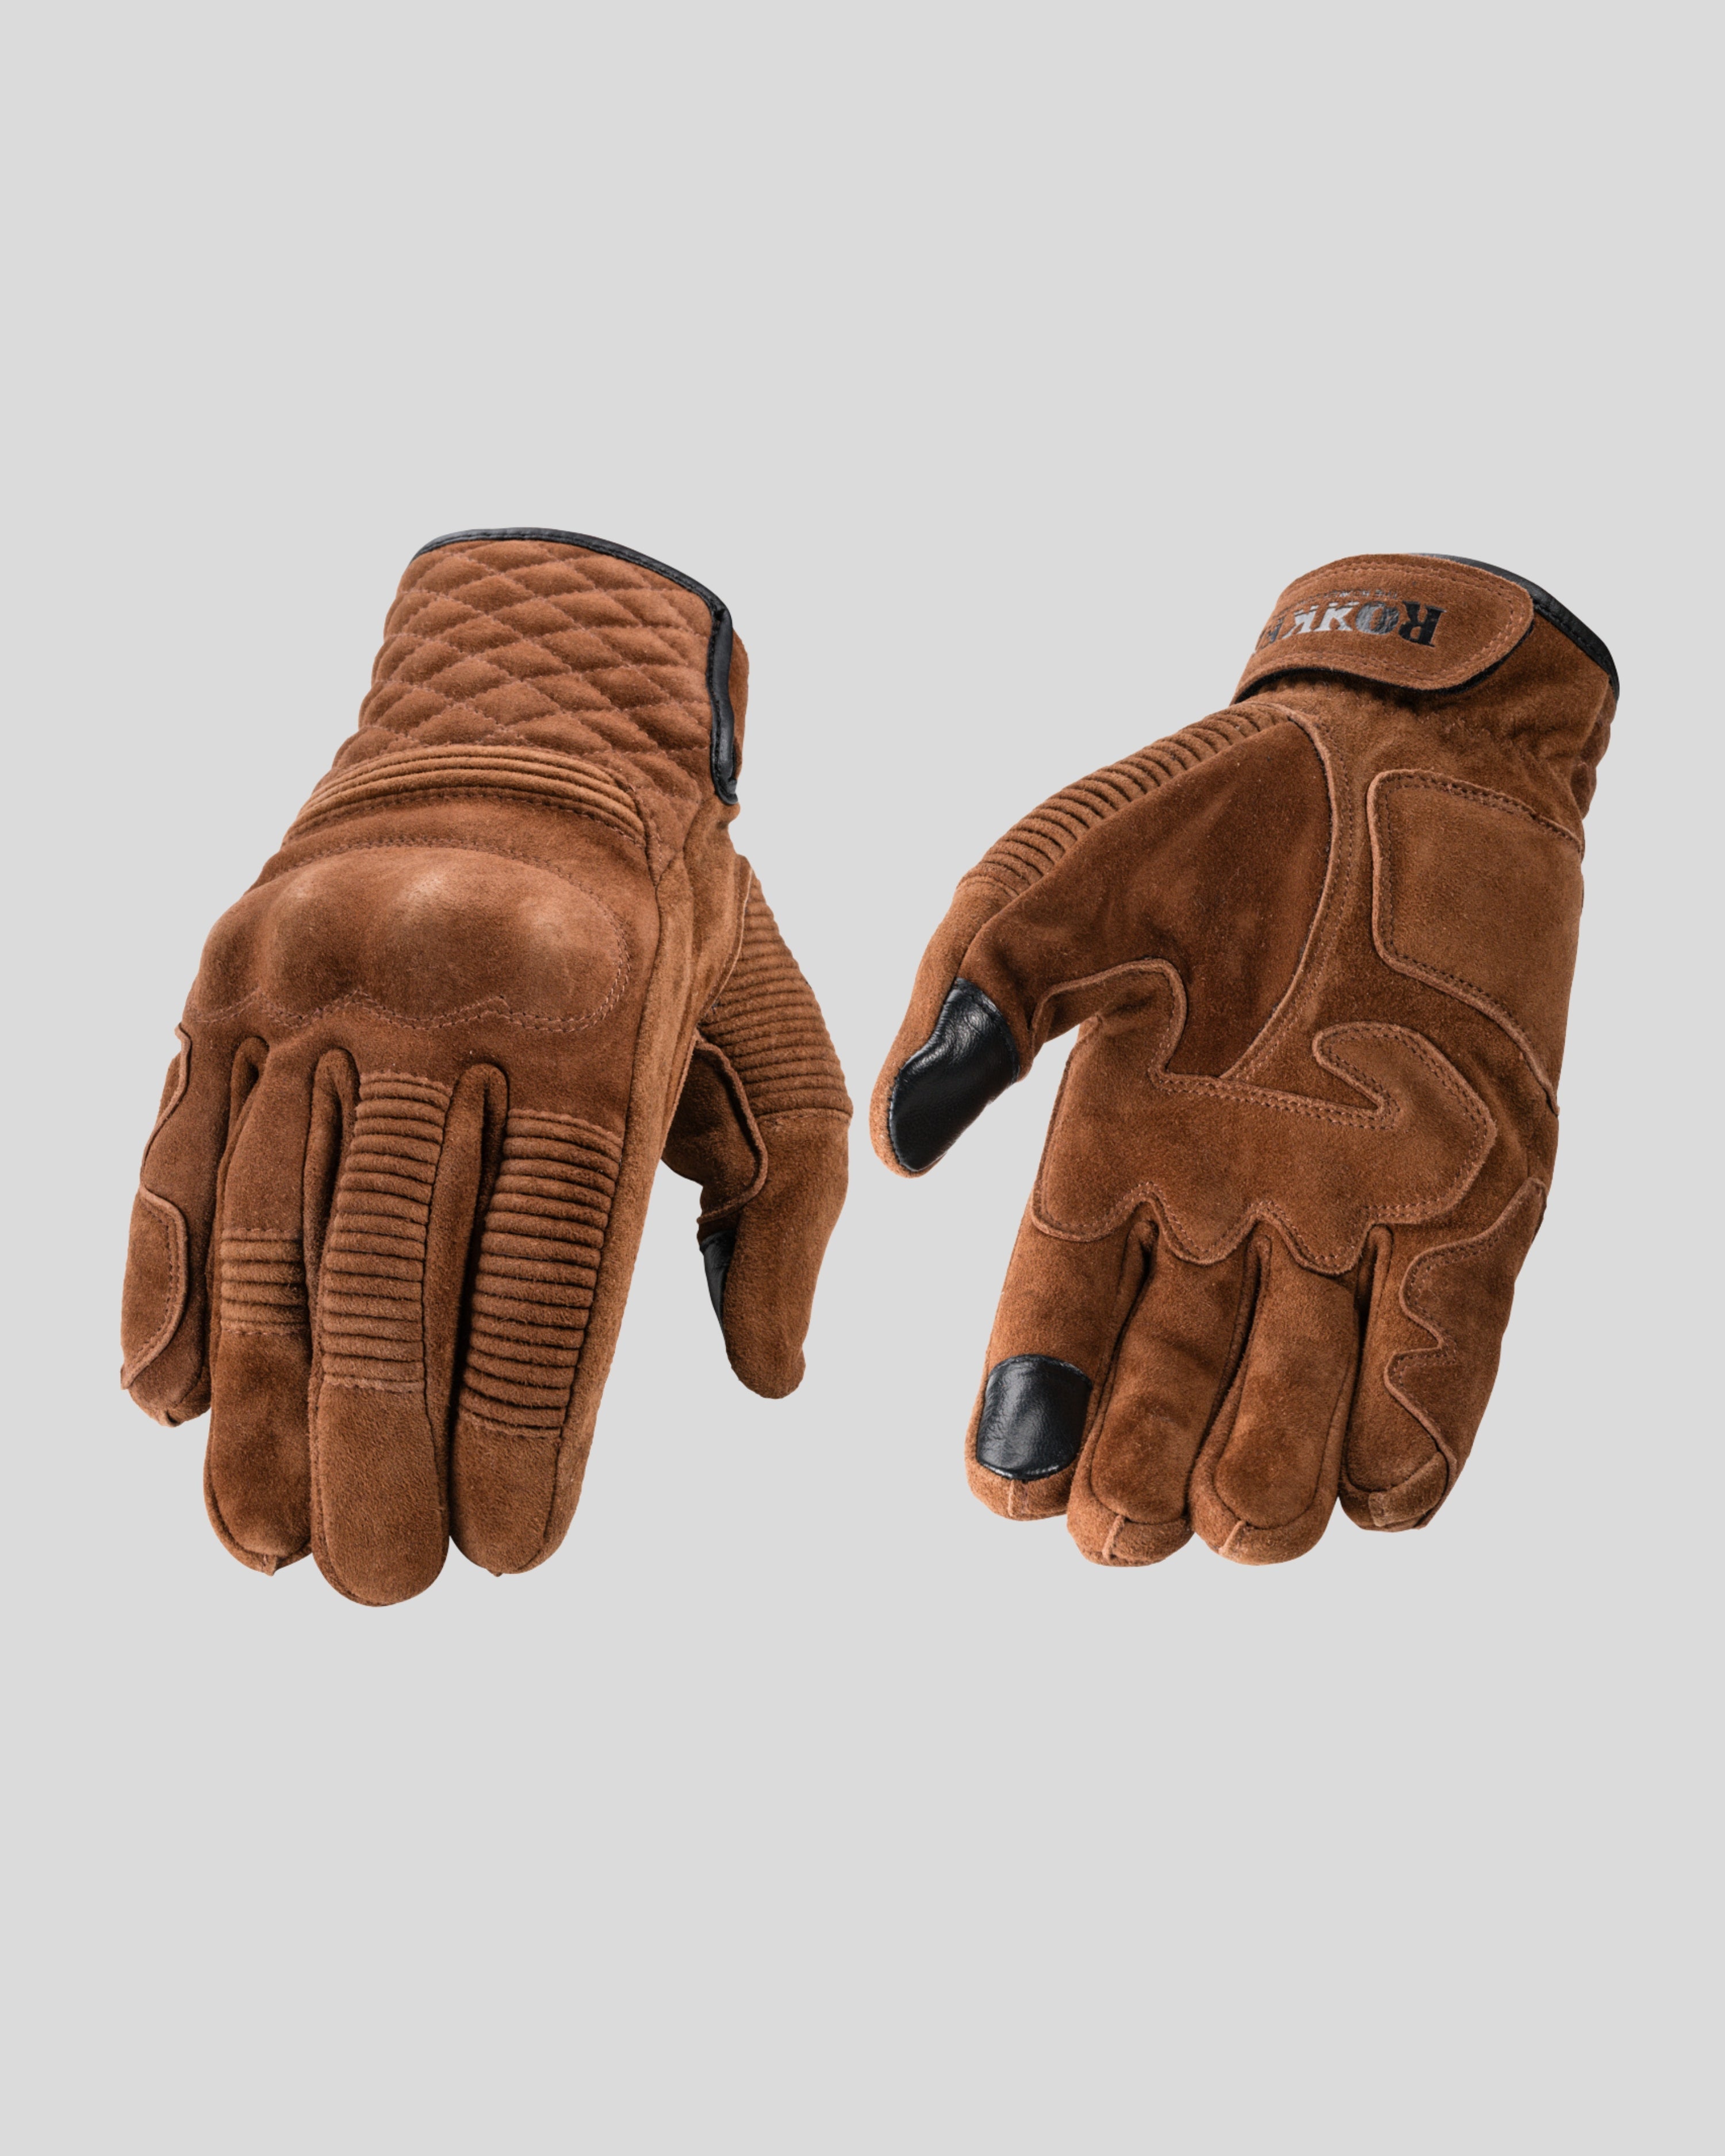 Motorcycle gloves by ROKKER - the best grip for your rides